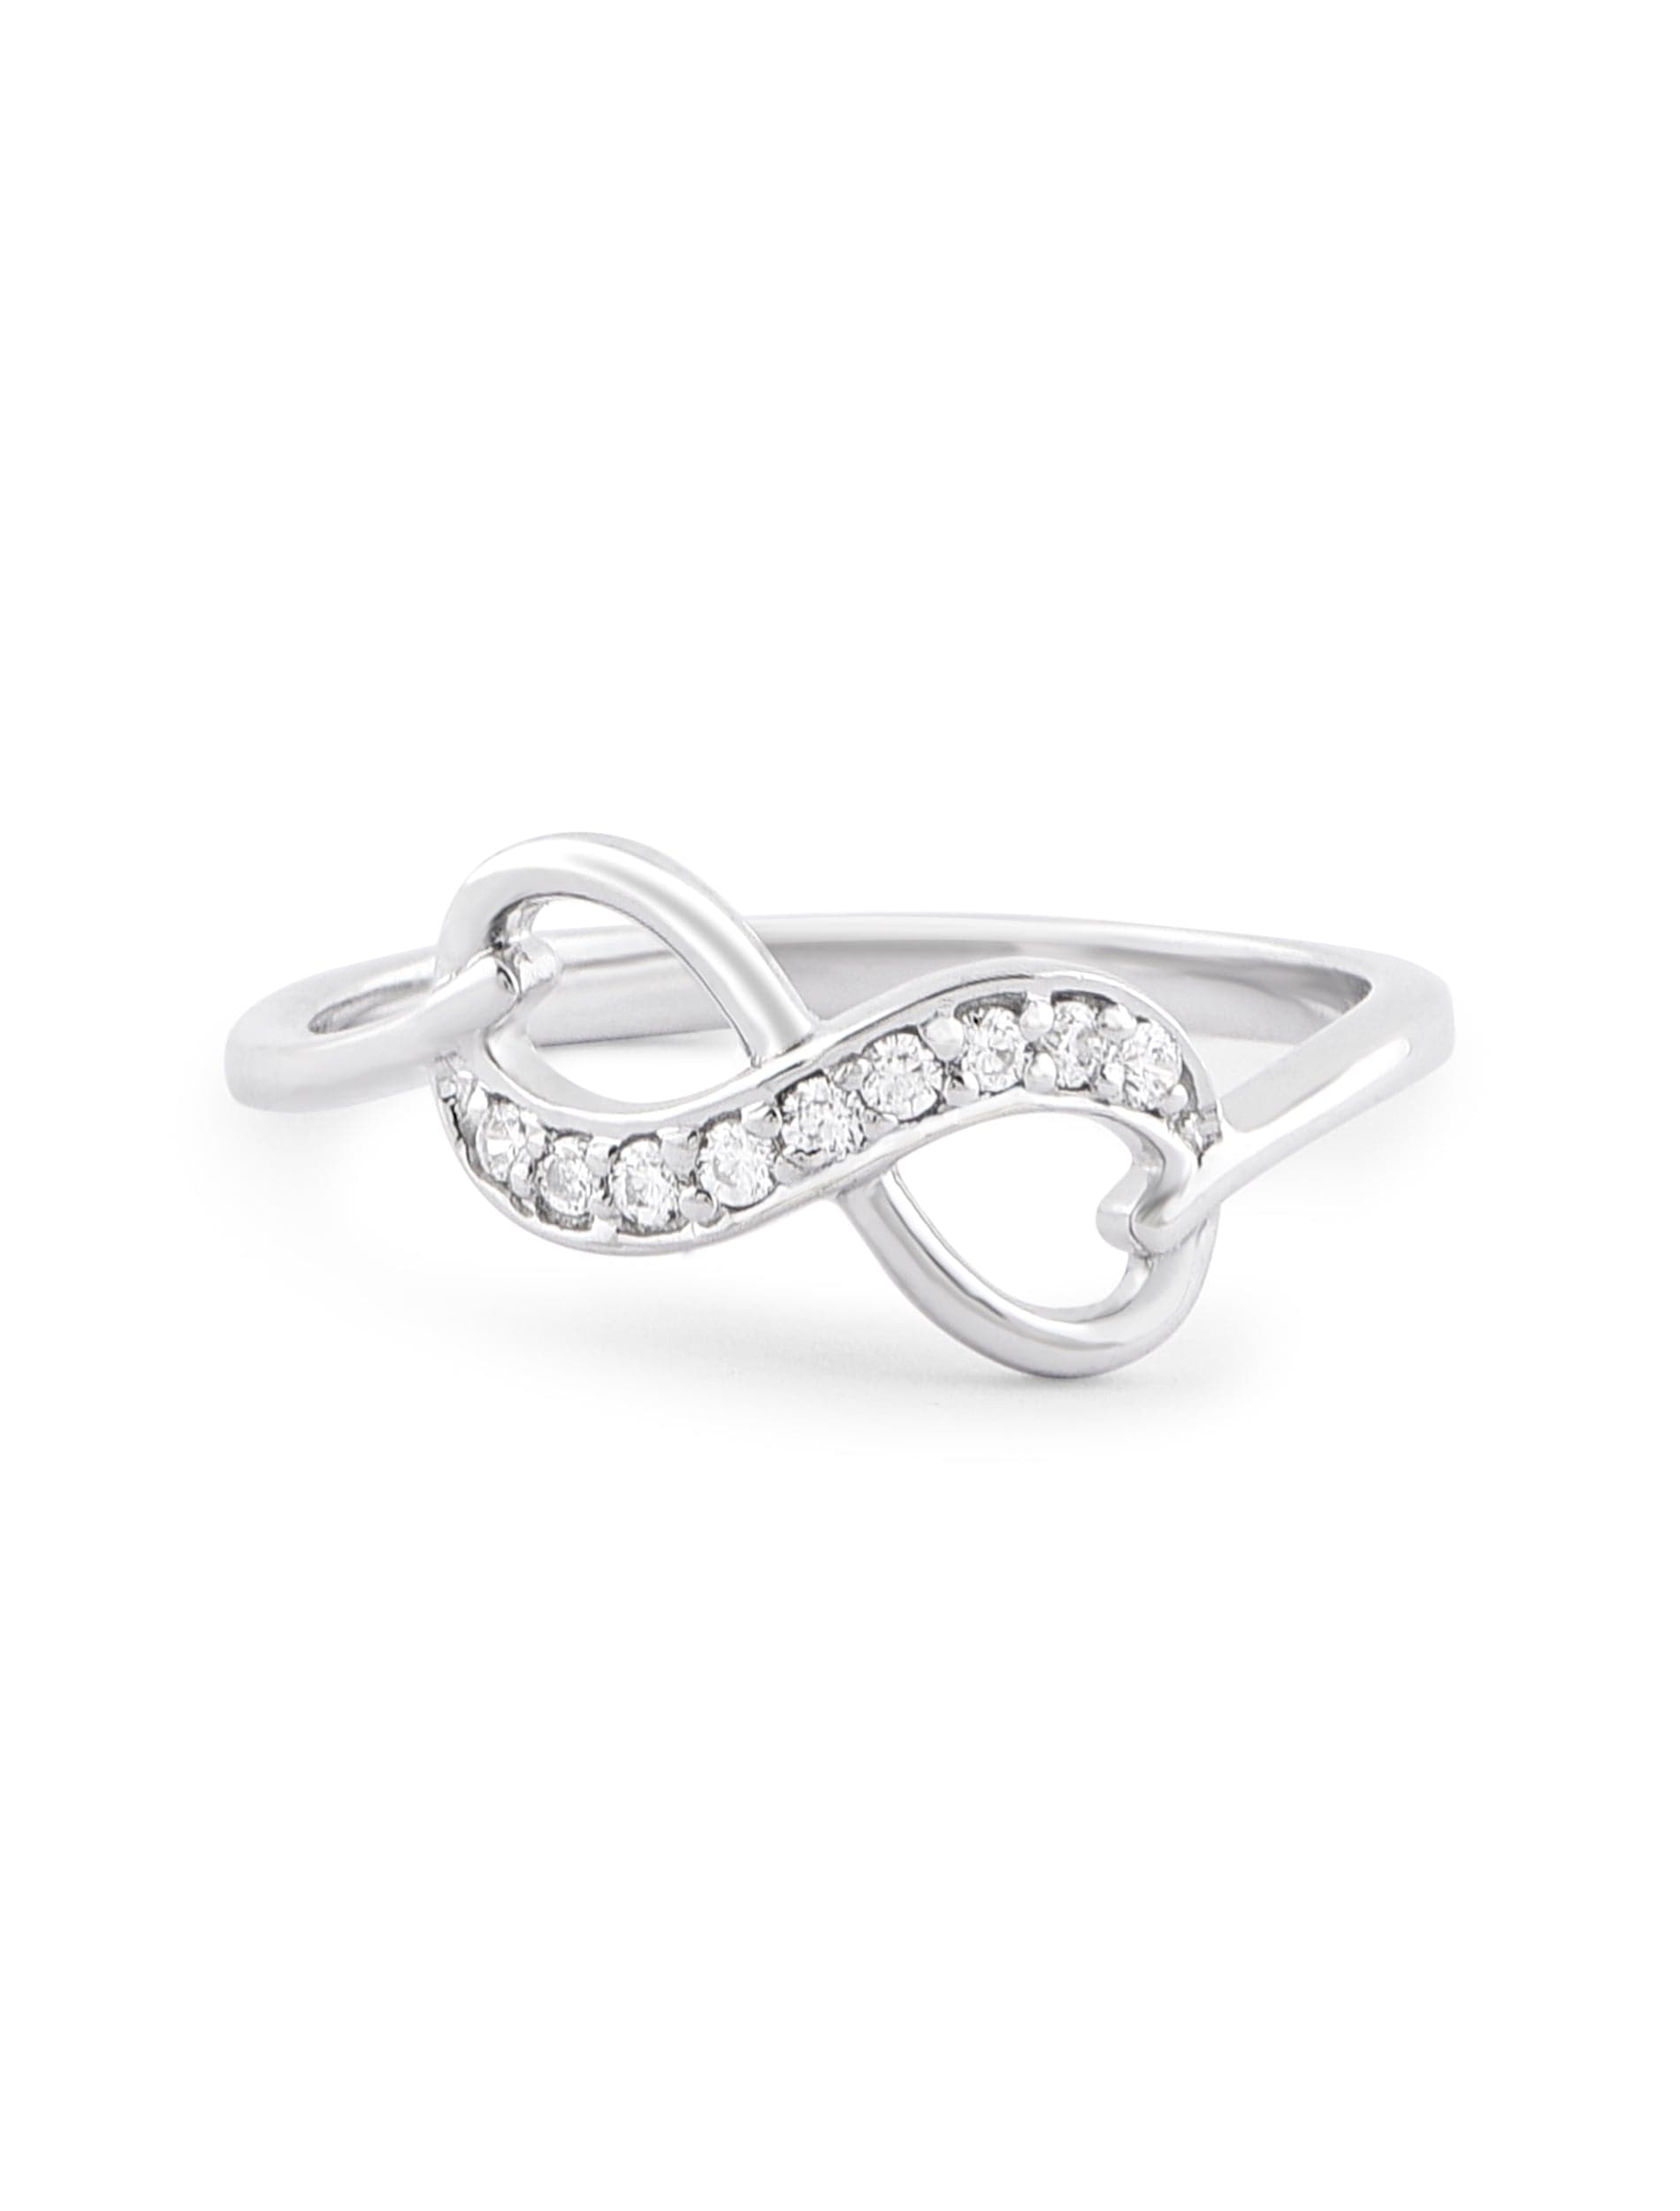 The Swirl Wedding Ring - Diamond Jewellery at Best Prices in India |  SarvadaJewels.com